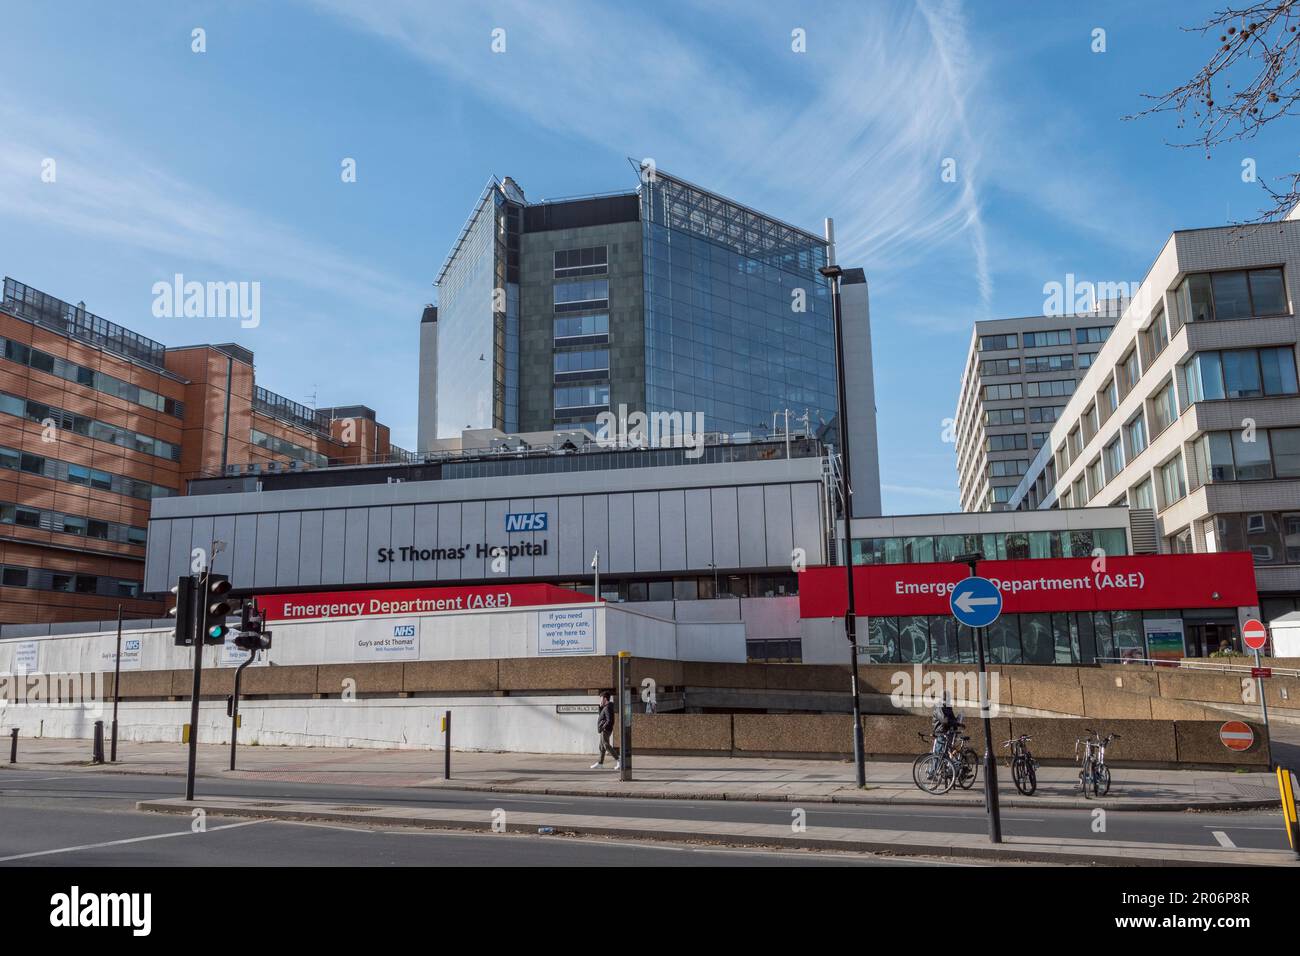 External view of St Thomas' Hospital, part of Guy's and St Thomas' NHS Foundation Trust in Central London, UK (Feb 23).. Stock Photo